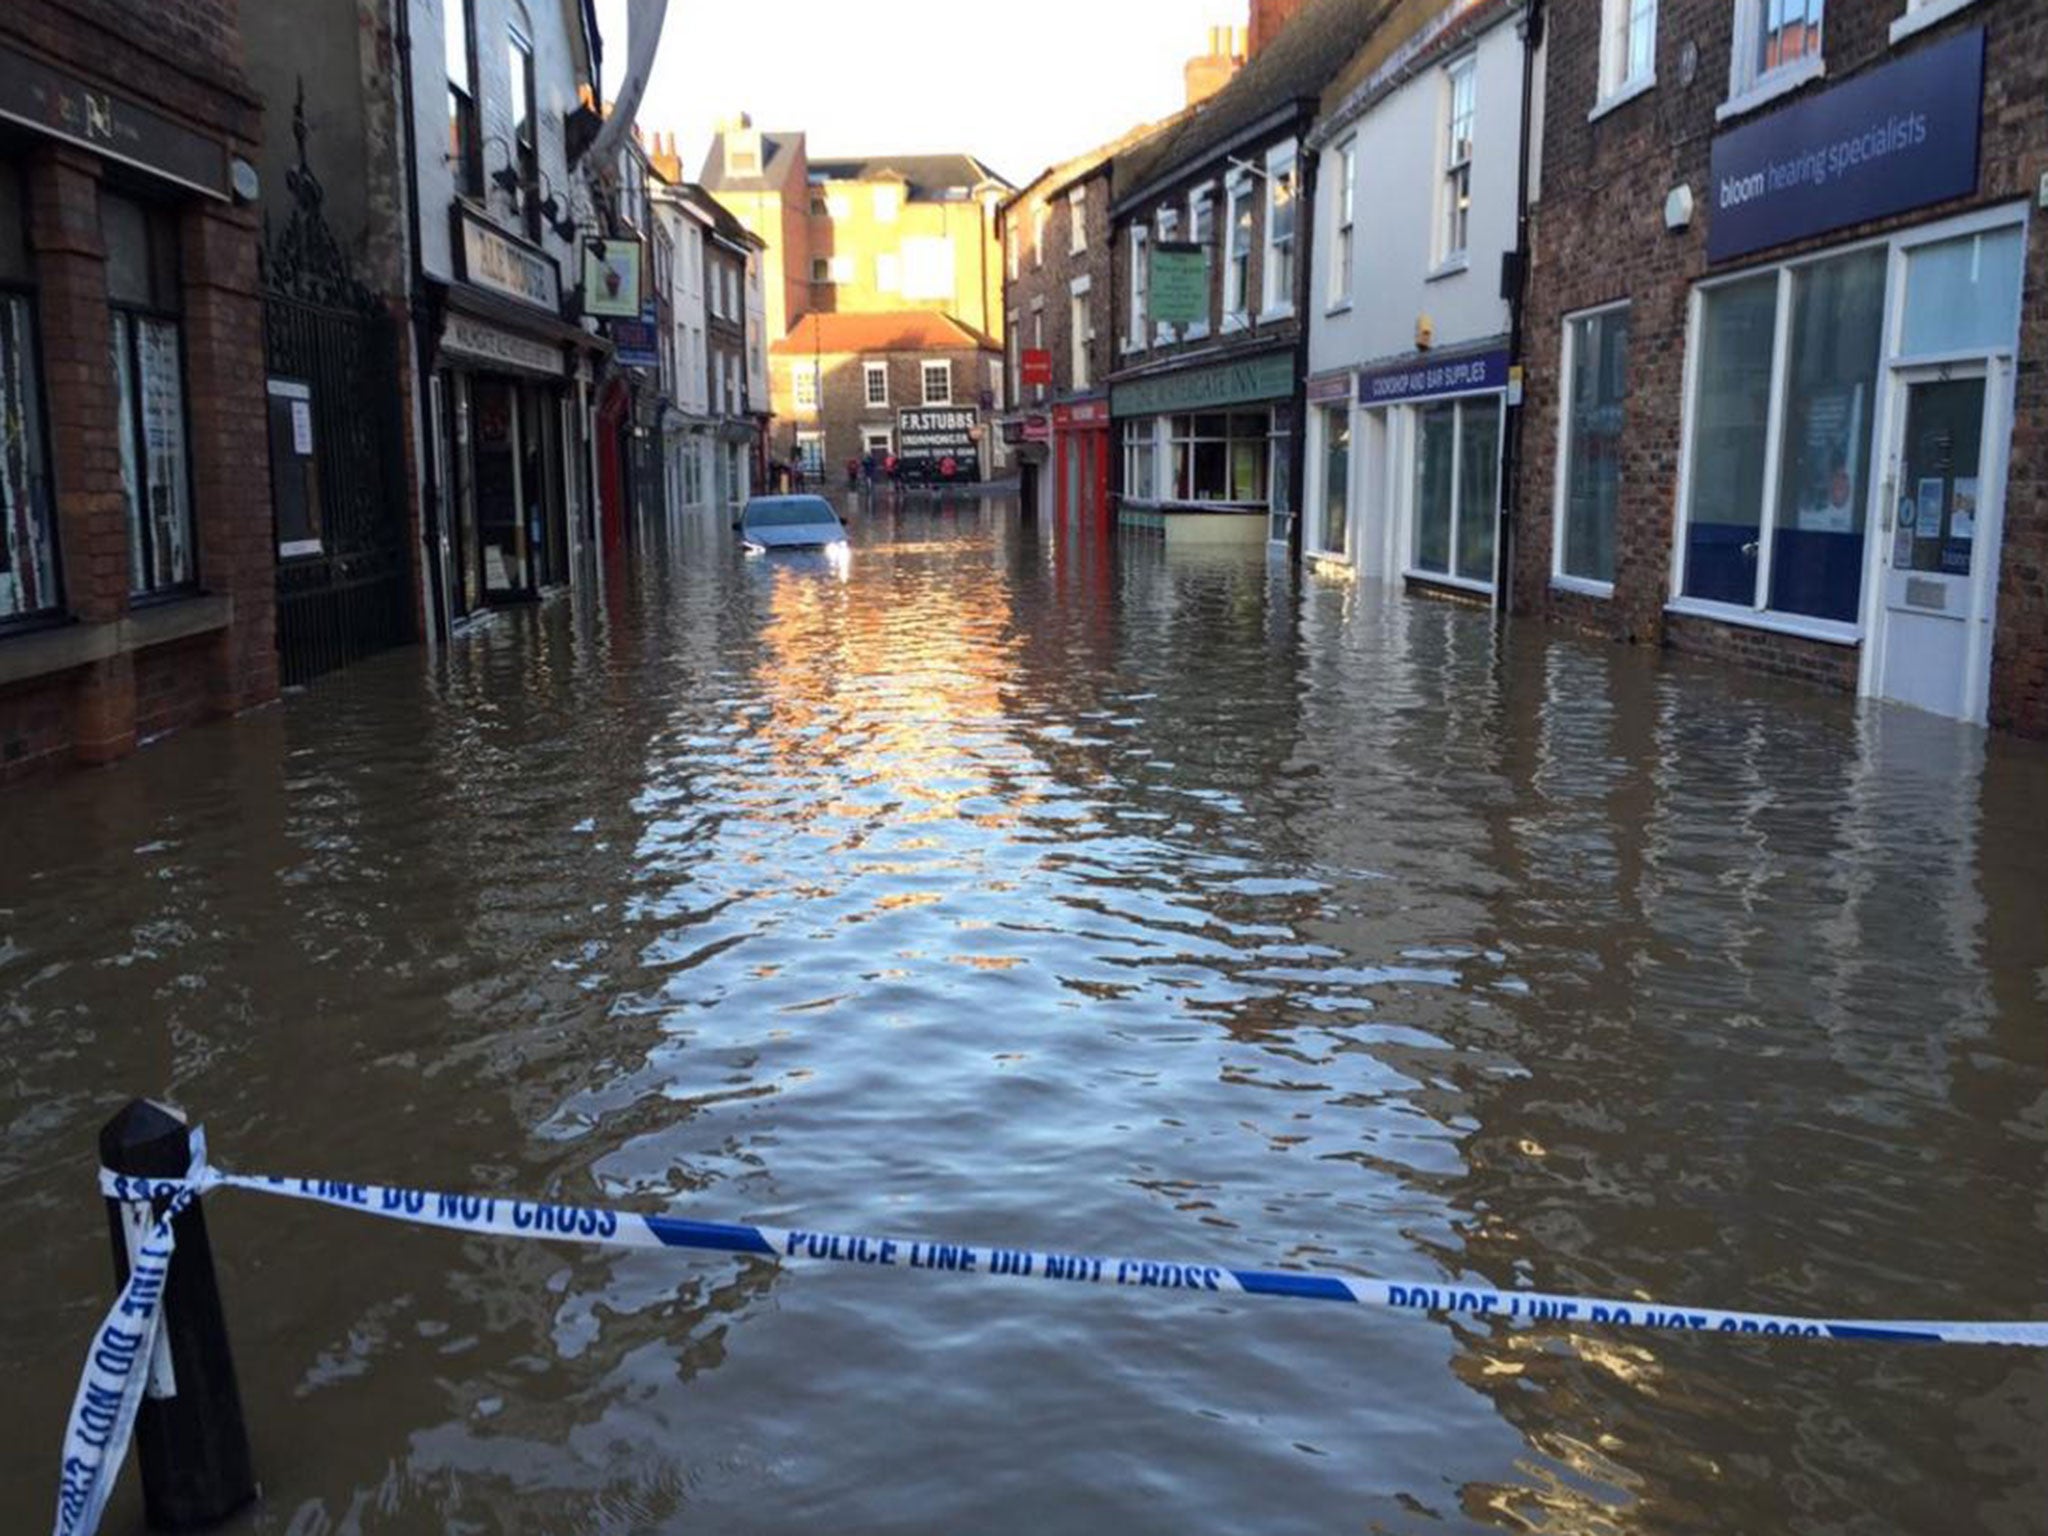 The flooding in Walmgate, York, on 27 December